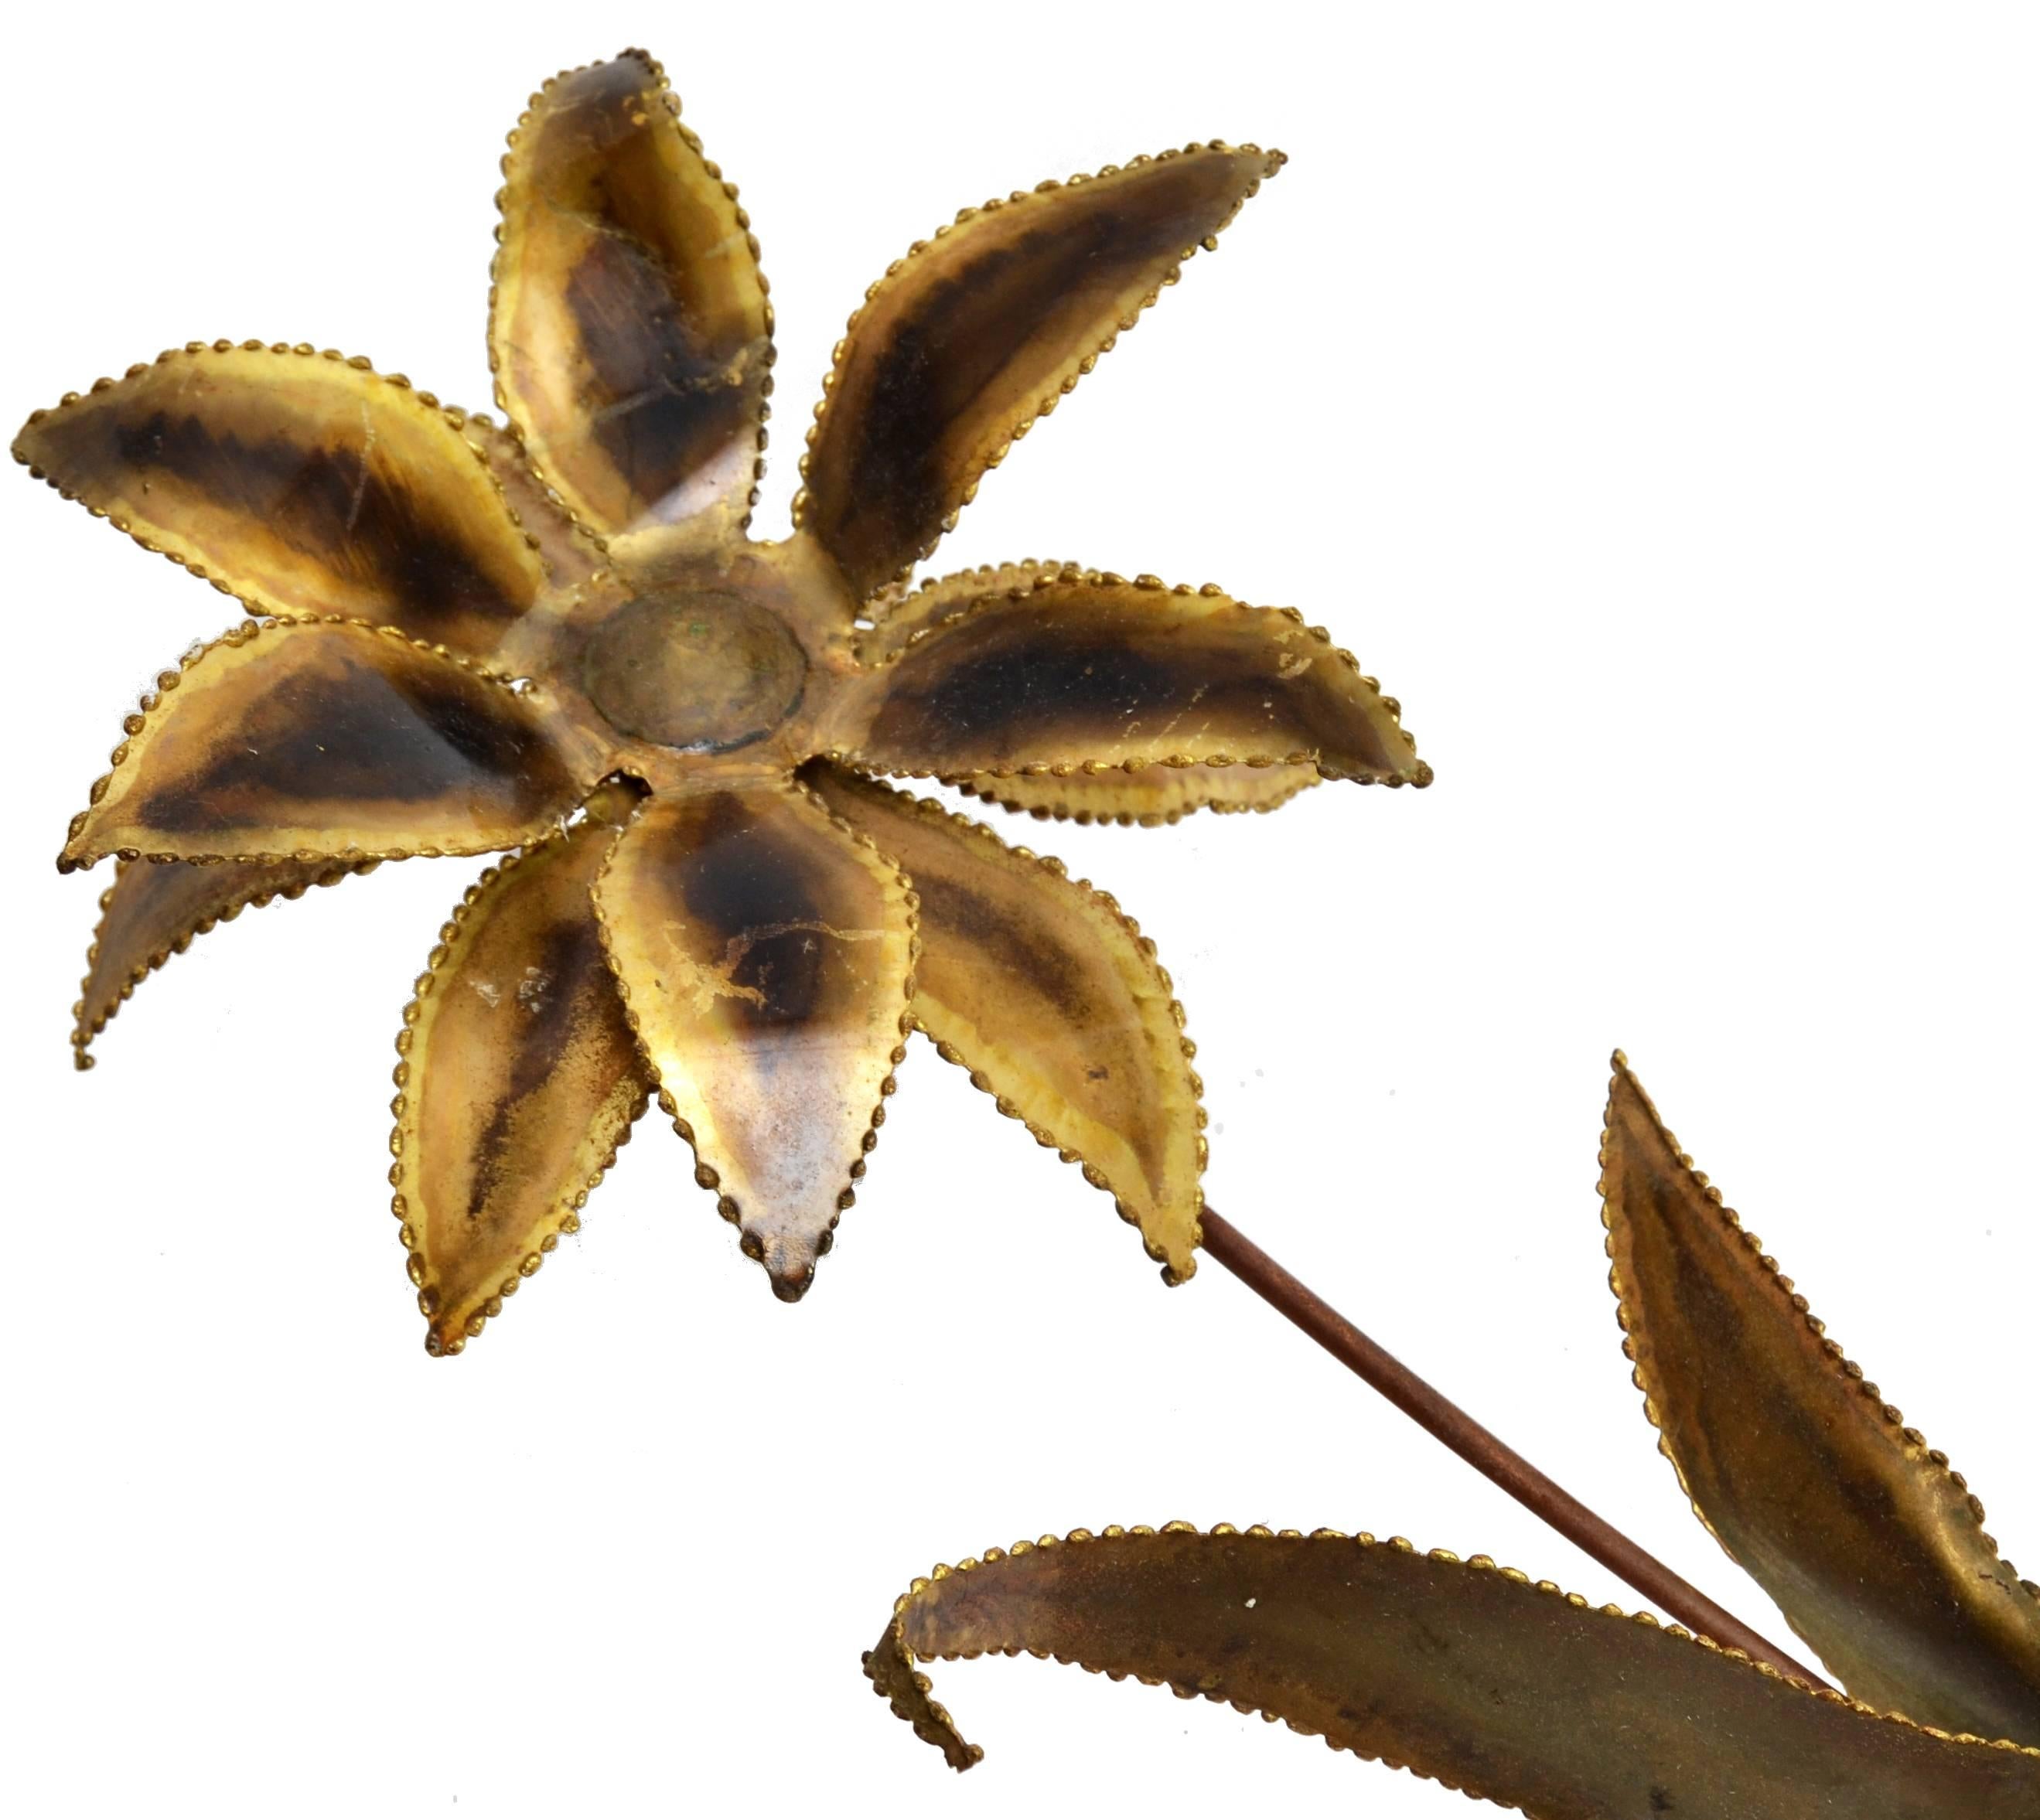 Mid-Century Modern Curtis Jere flower brass and metal sculpture / wall art.
Signed Jere and dated 1972.
 